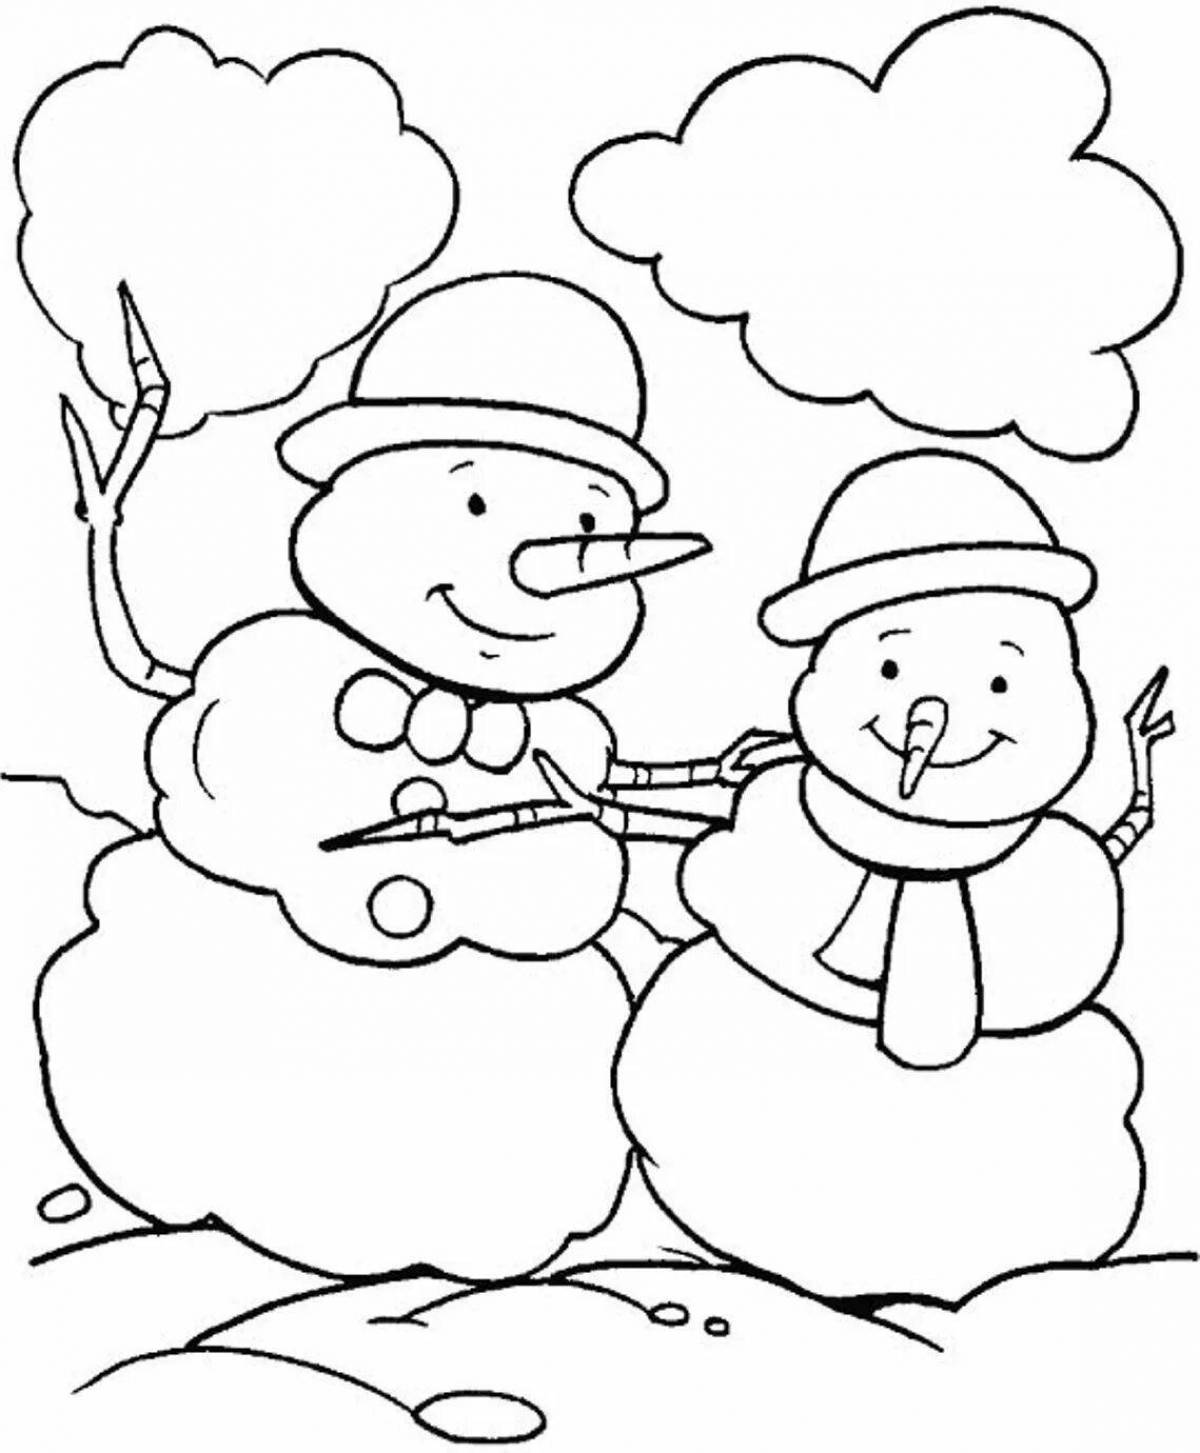 Exquisite winter coloring book for kids 2 3